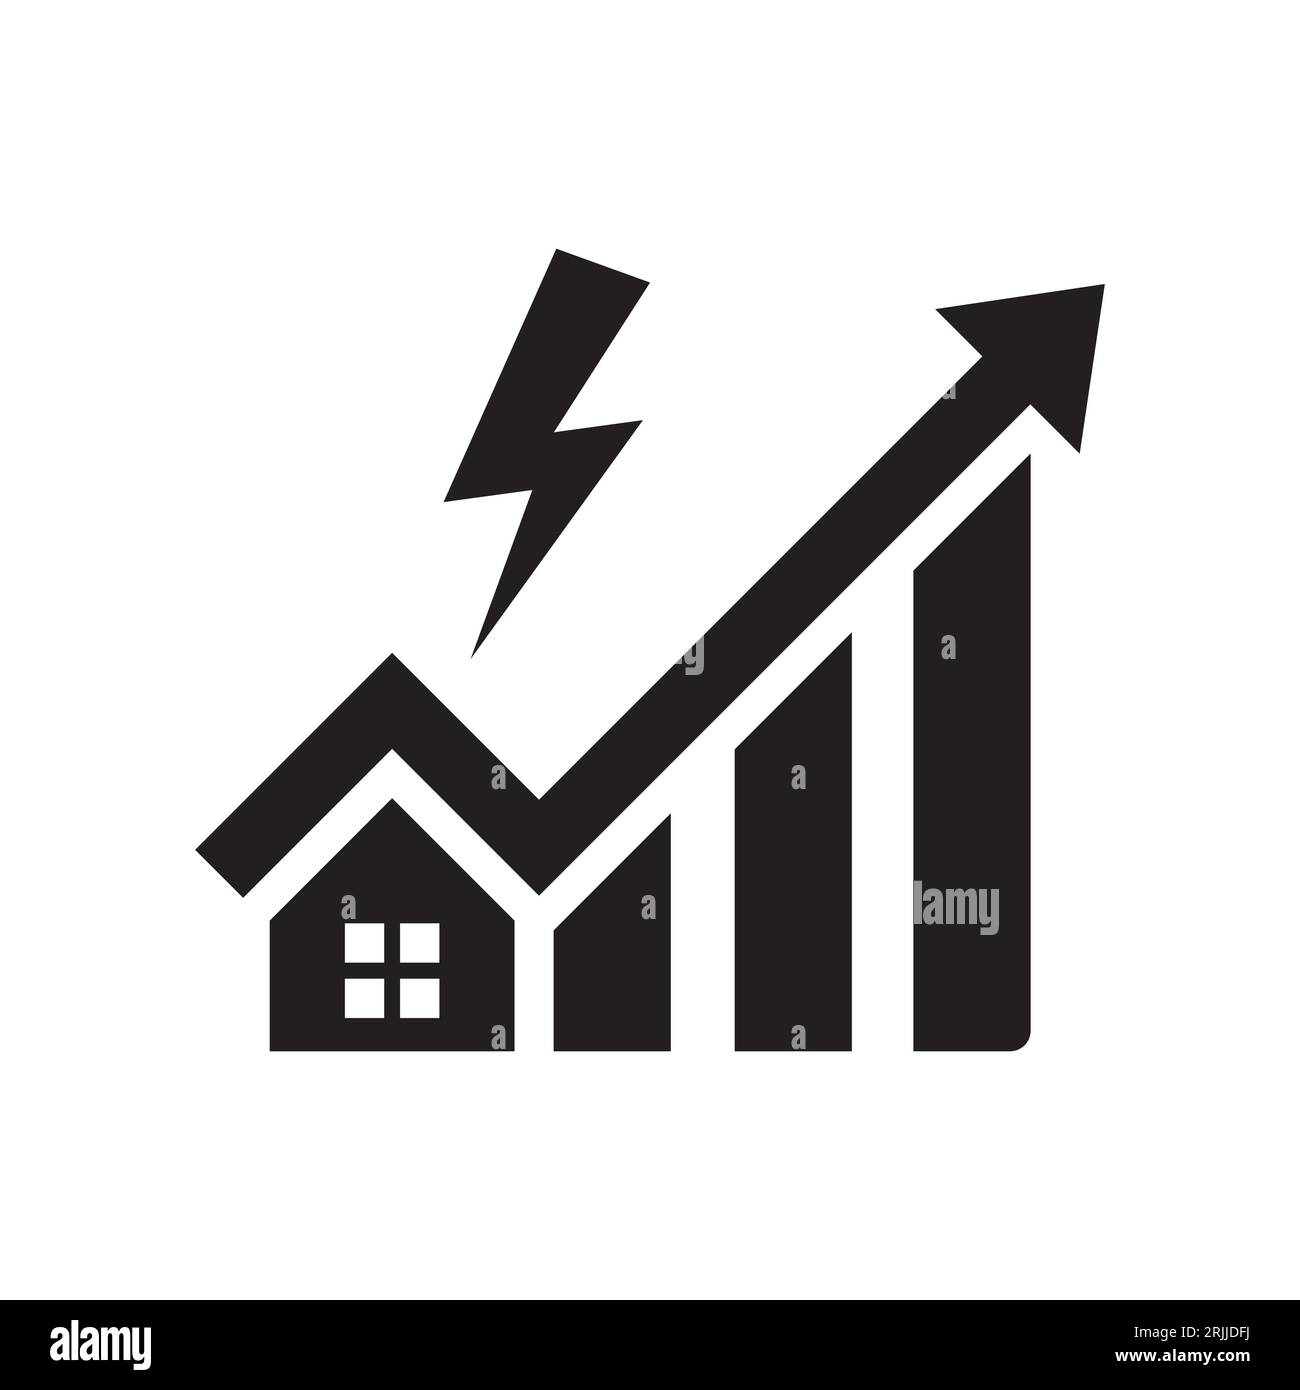 Electricity price icon. Cost of living. Vector icon isolated on white background. Stock Vector